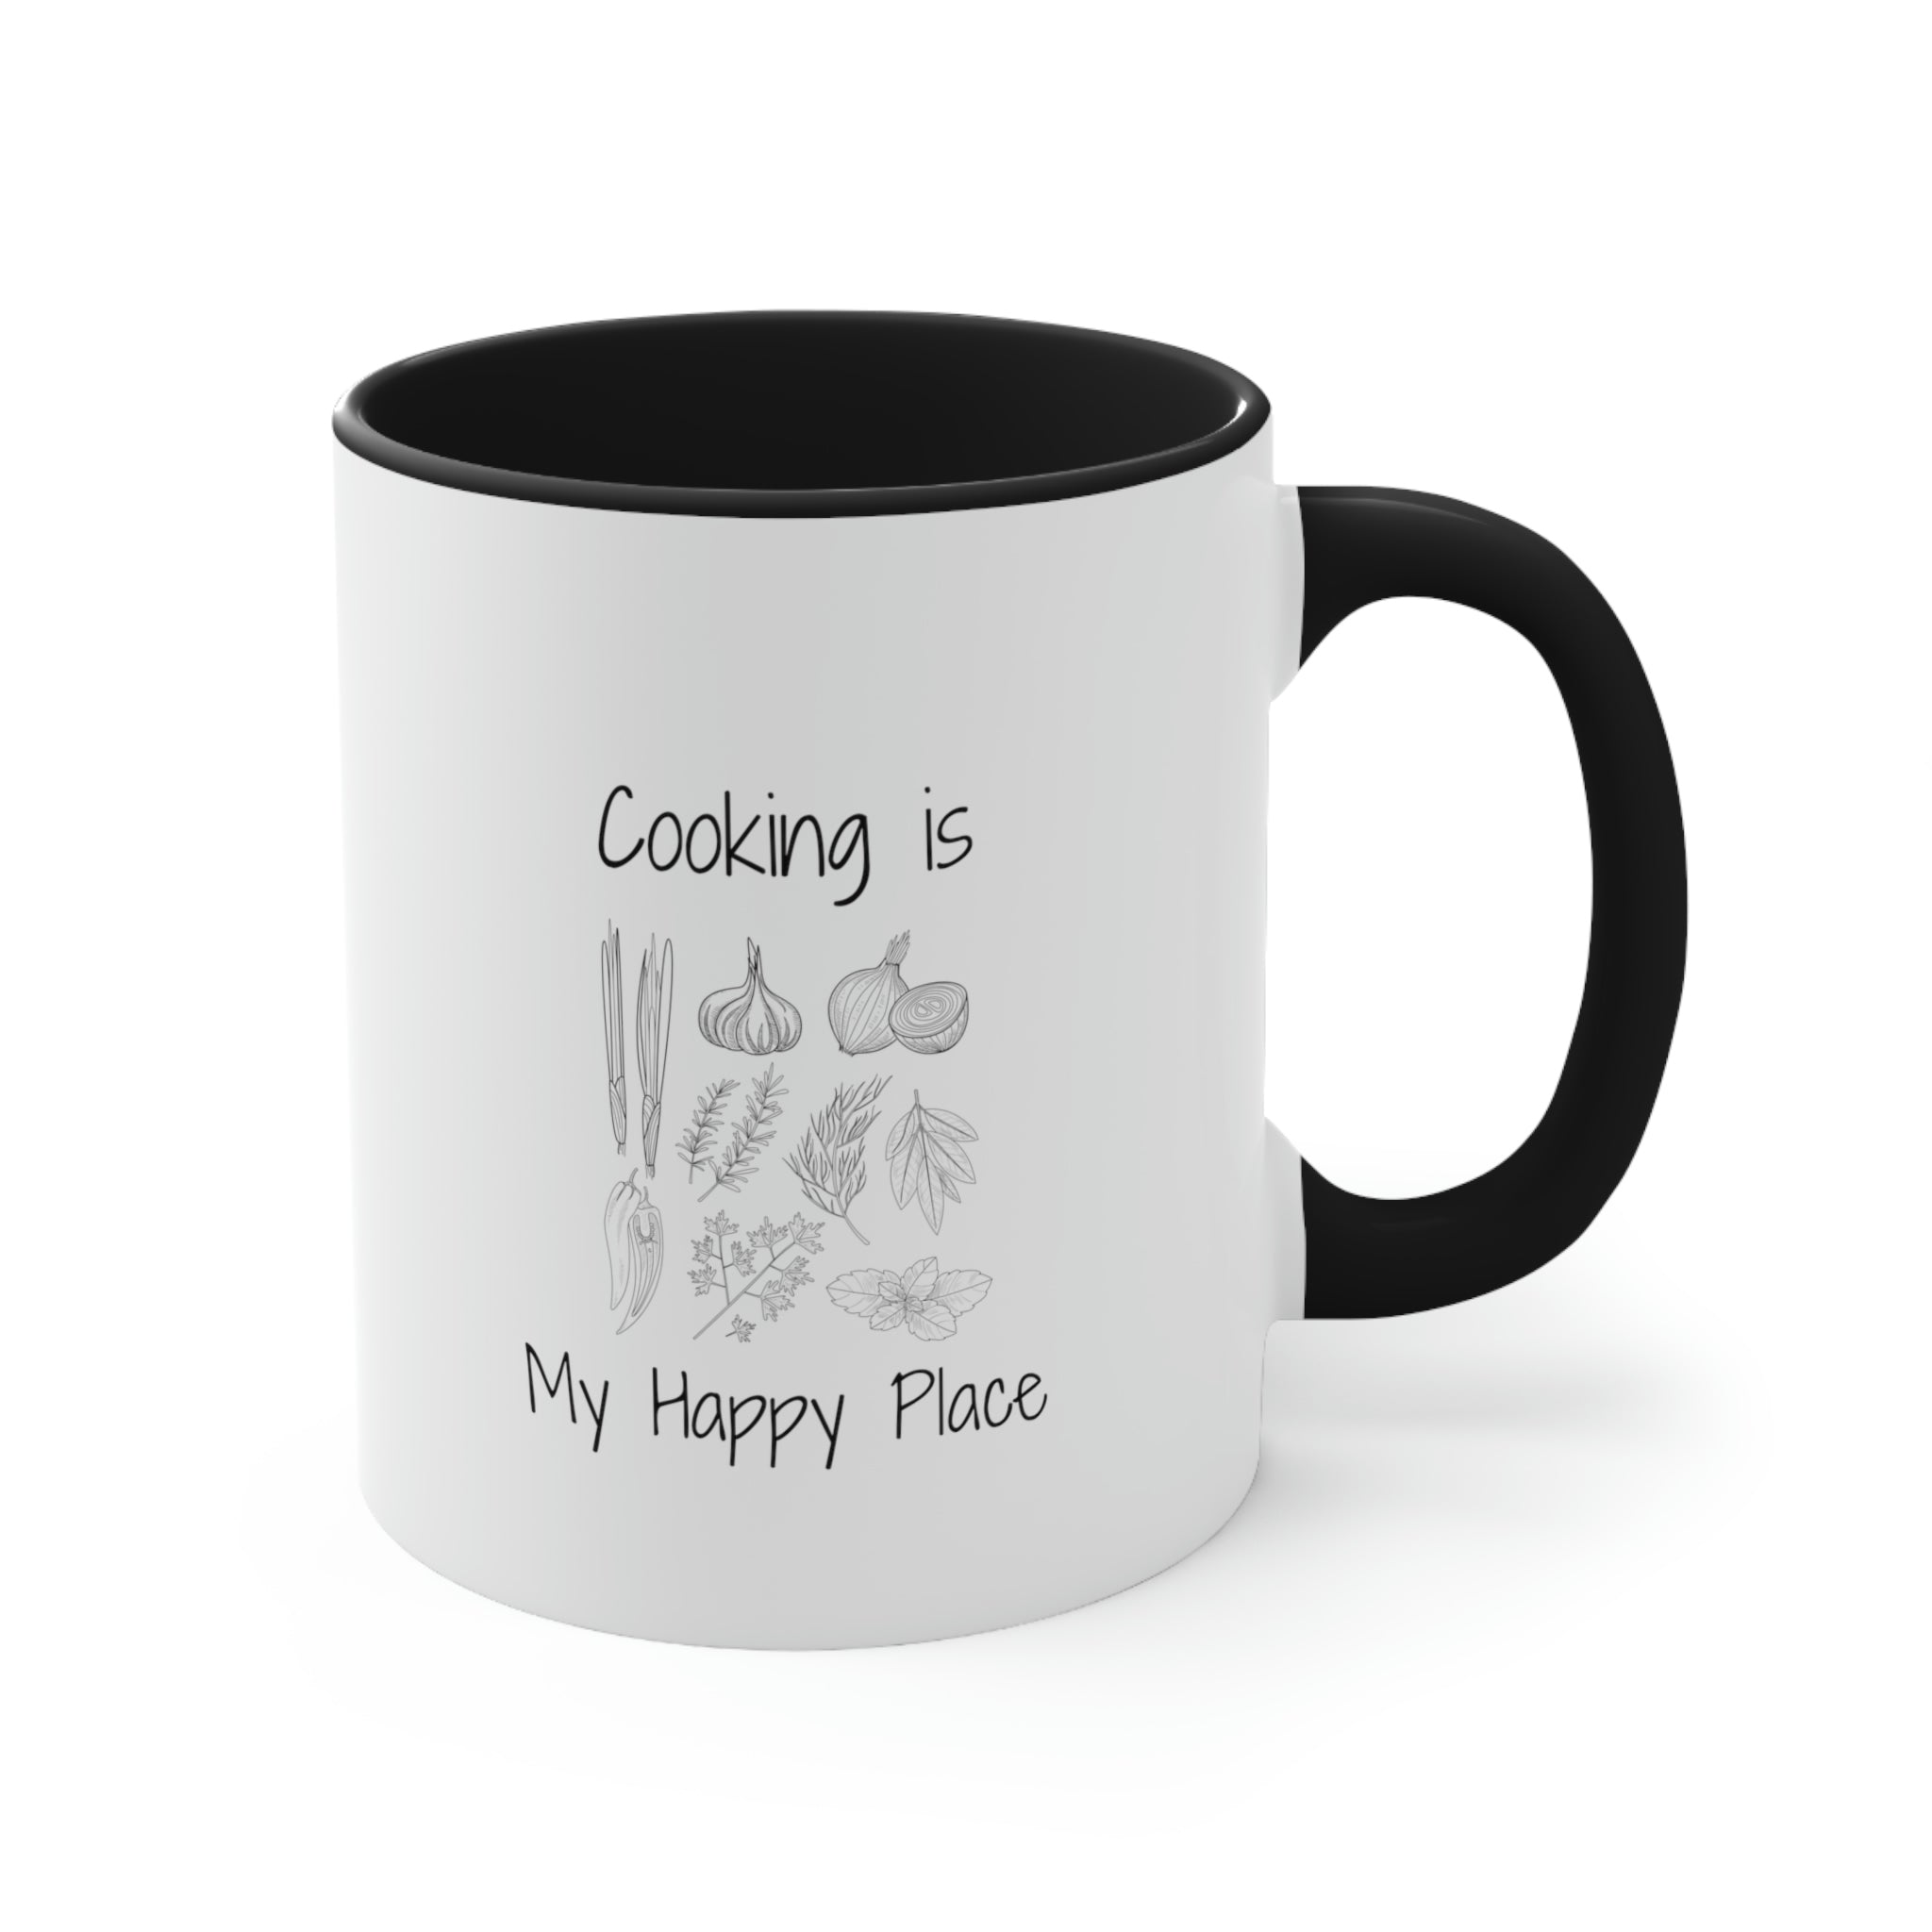 Coffee Mug, Cooking is My Happy Place 11oz Ceramic Mug with Light-Hearted Design, Dishwasher and Microwave Safe, Perfect Gift for Hot Beverage Lovers - cooking mug 2